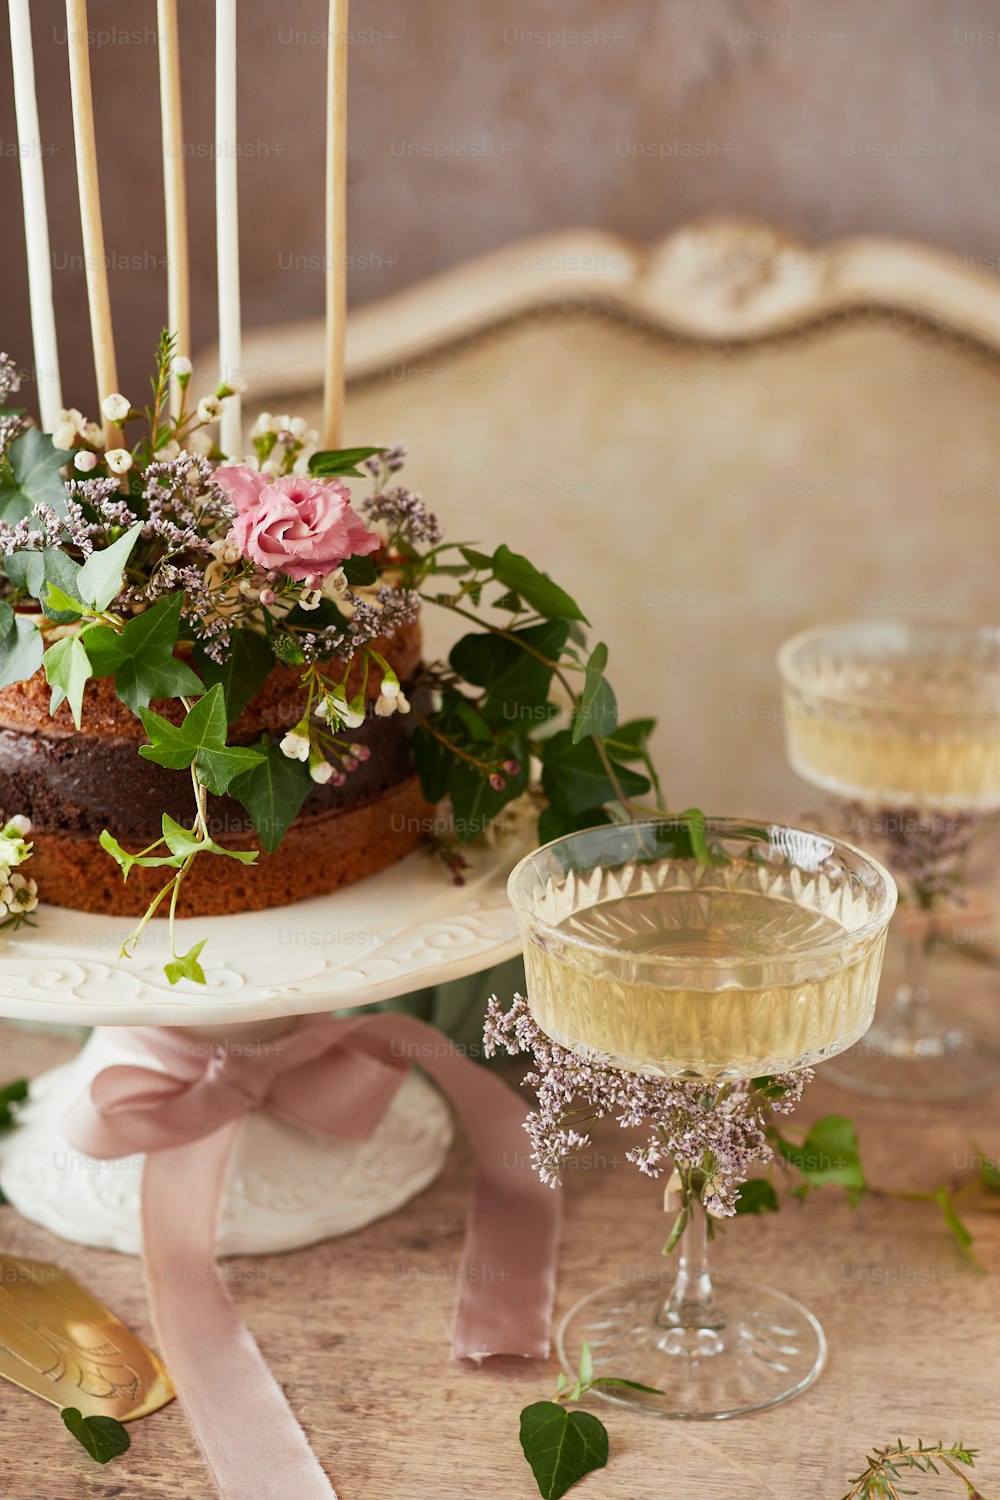 a cake on a table with candles and flowers